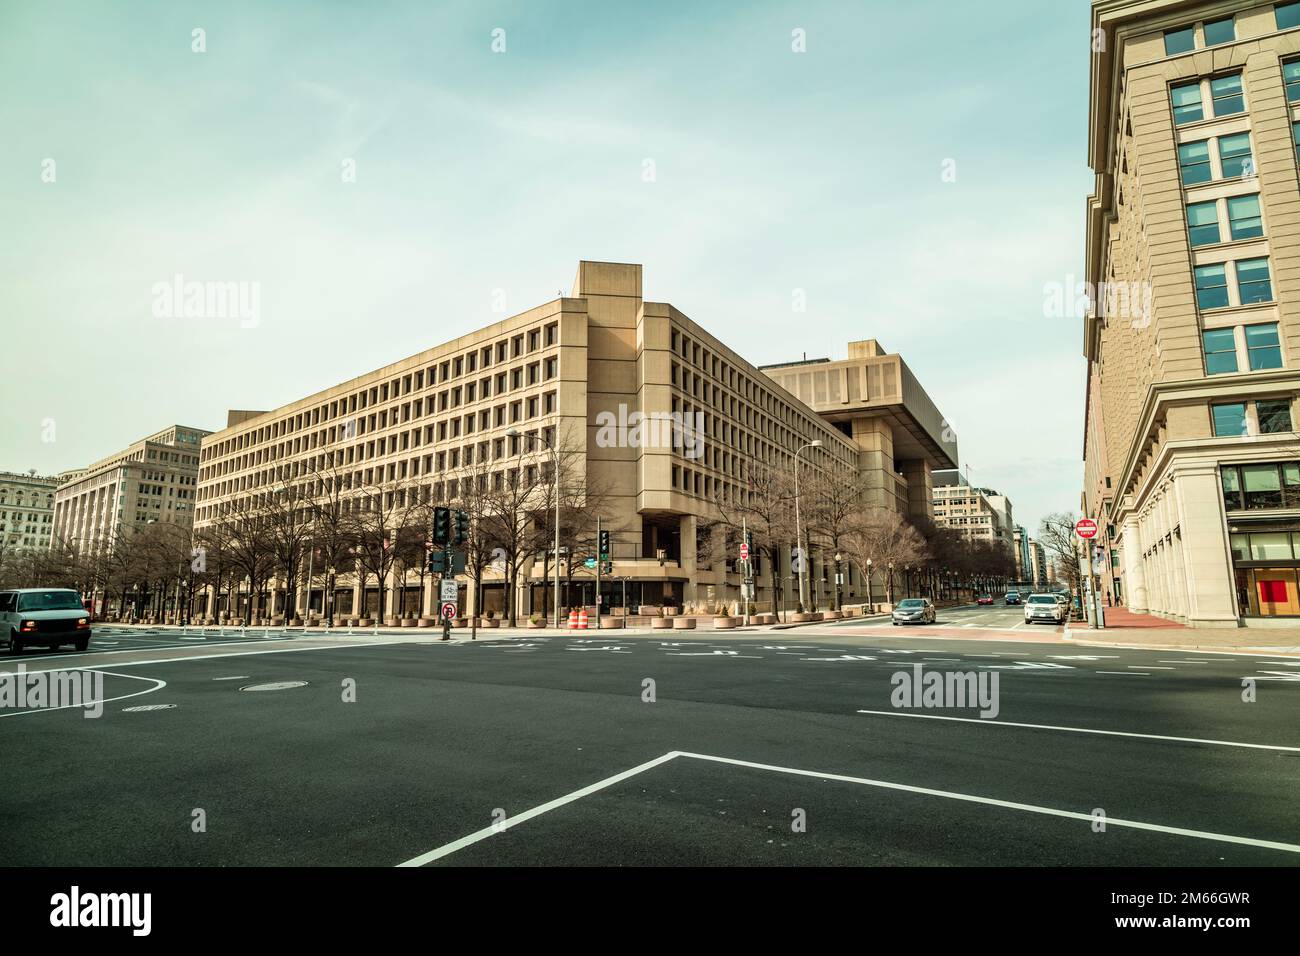 The J. Edgar Hoover Building, headquarters of the Federal Bureau of Investigation (FBI), in Washington, DC, seen from the intersection of Pennsylvania Stock Photo